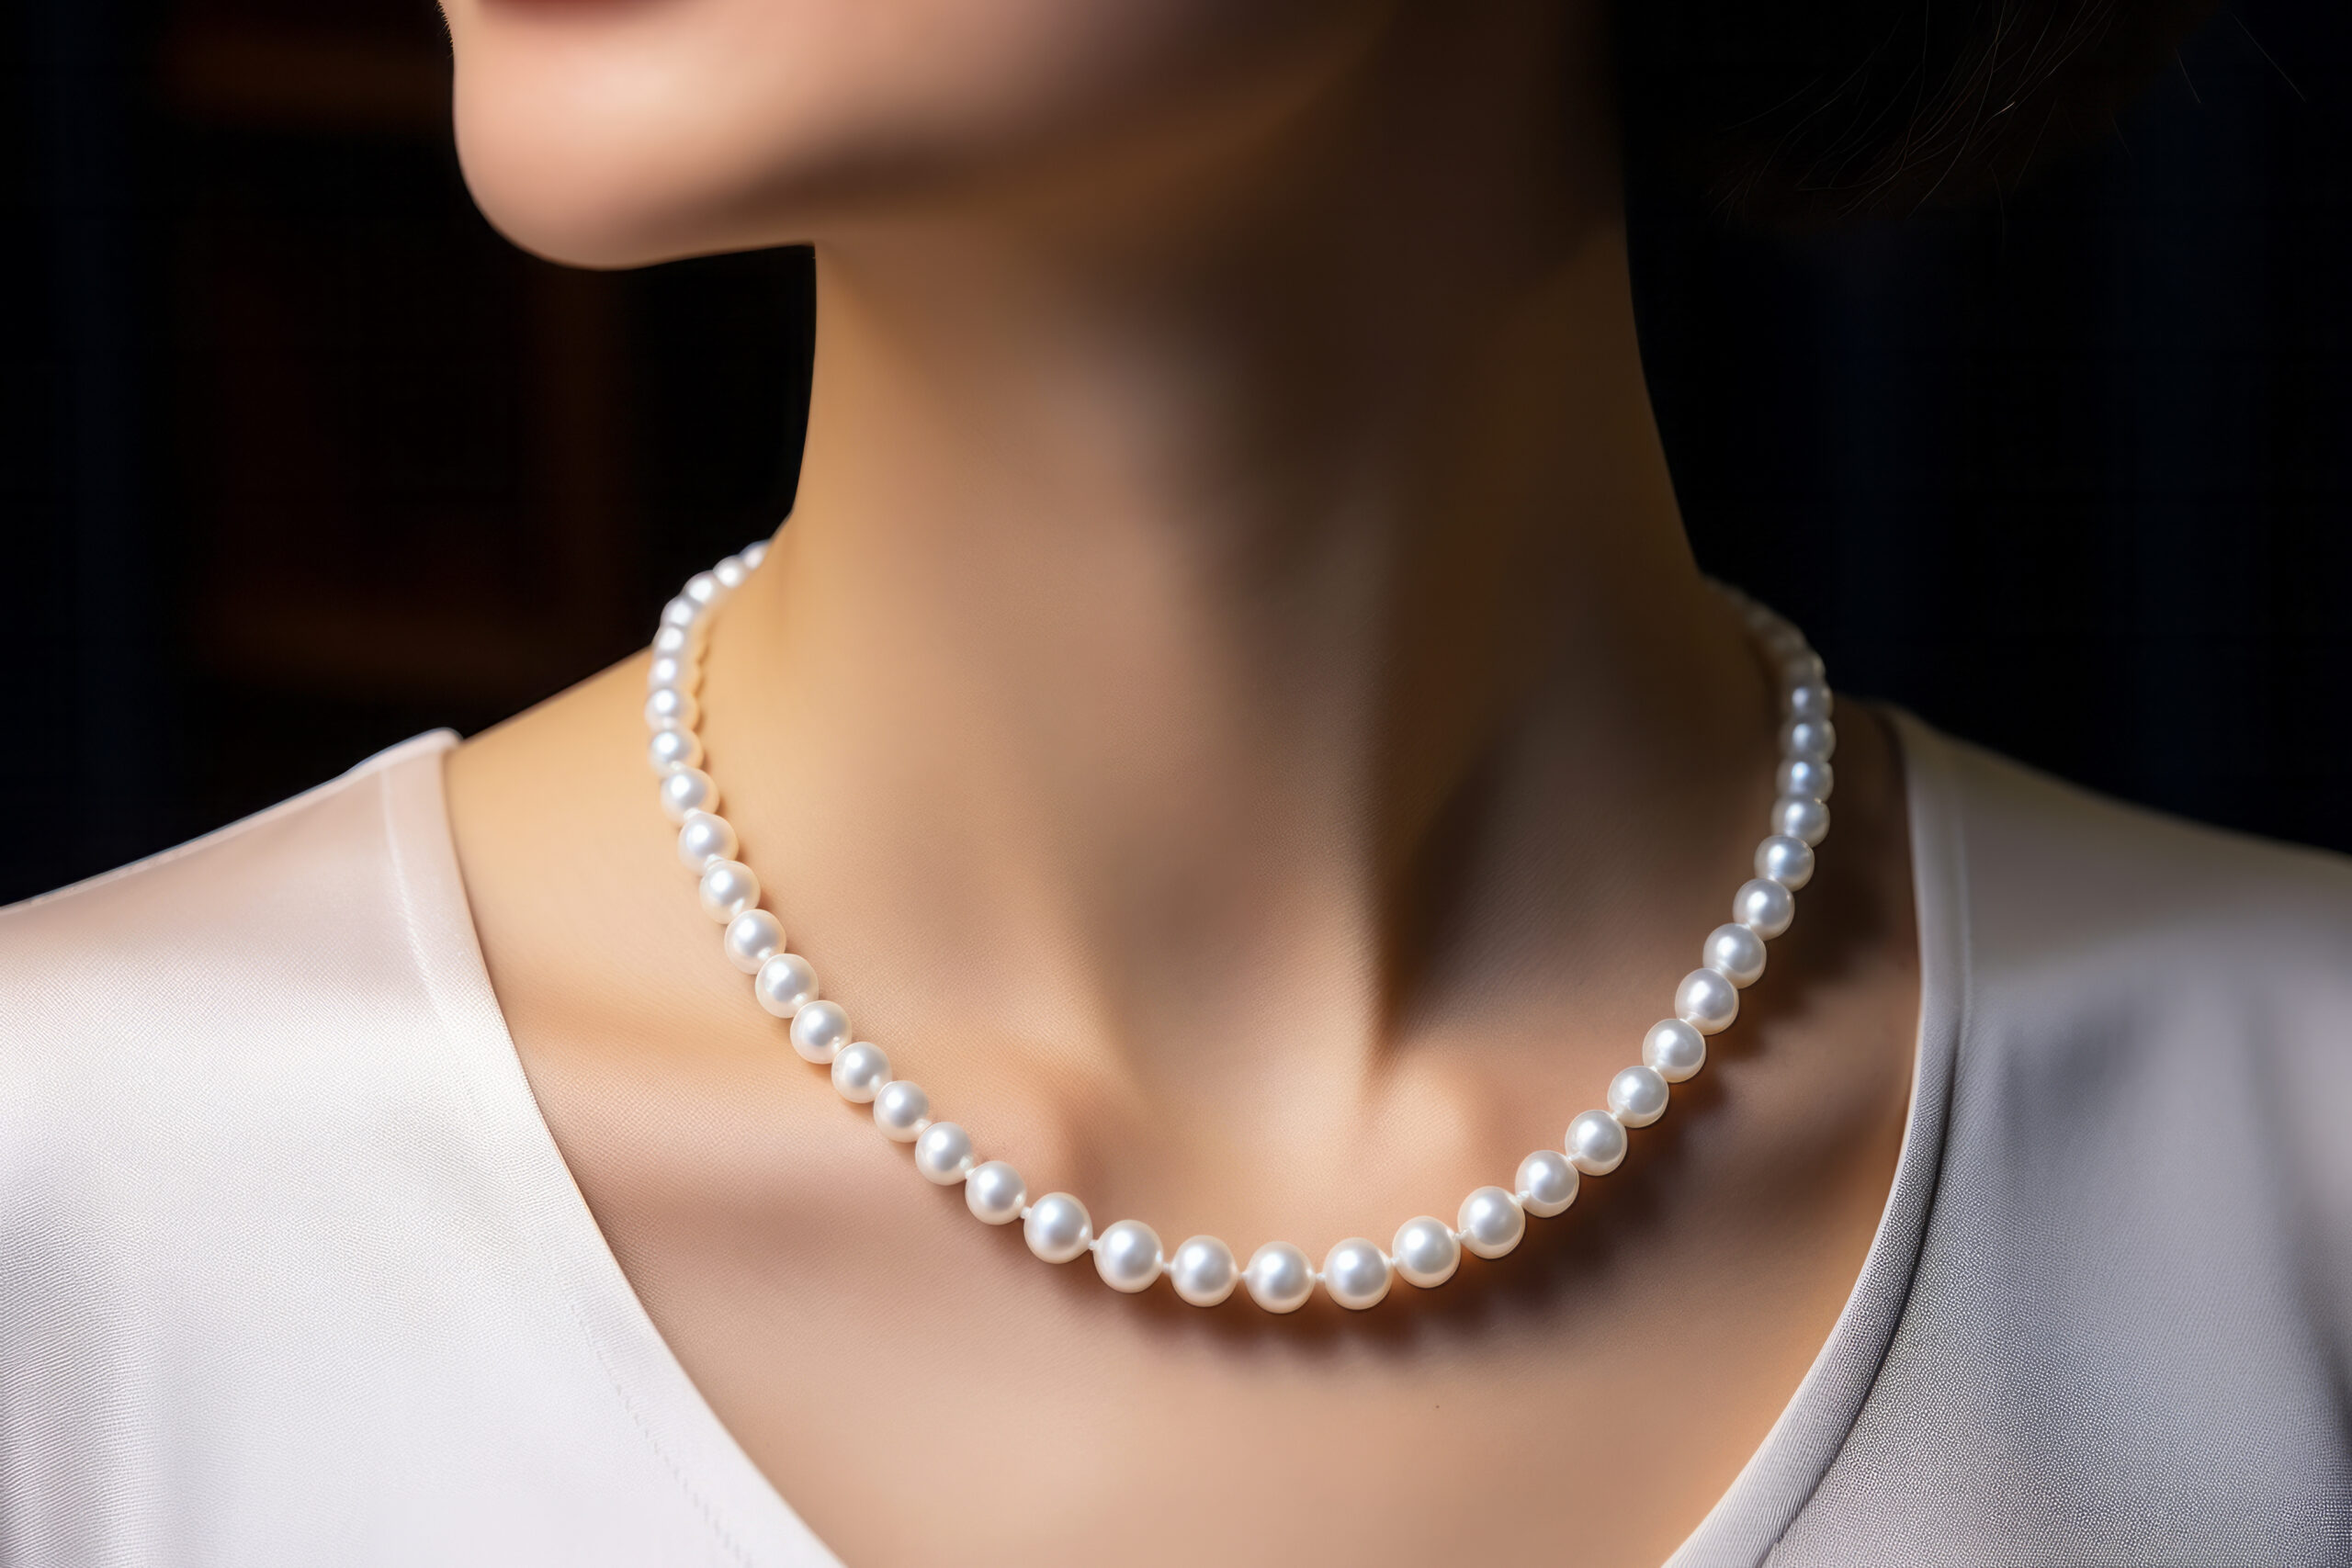 How to take care of the pearl jewellery?